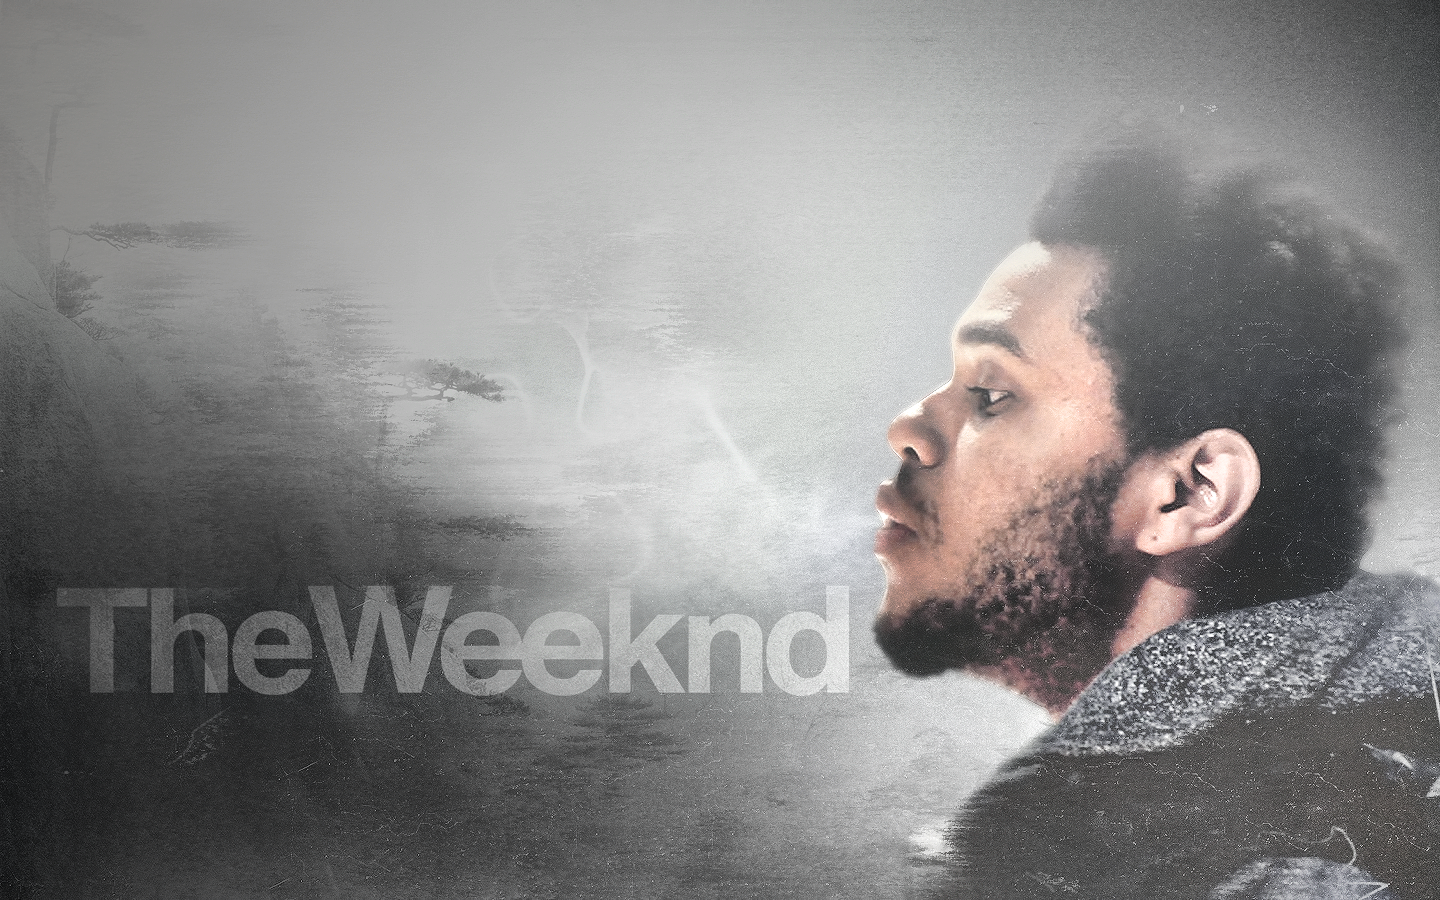 We're not complaining, though. The Weeknd is the latest artist to have one of their unreleased tracks leaked, but damn is this one on point!